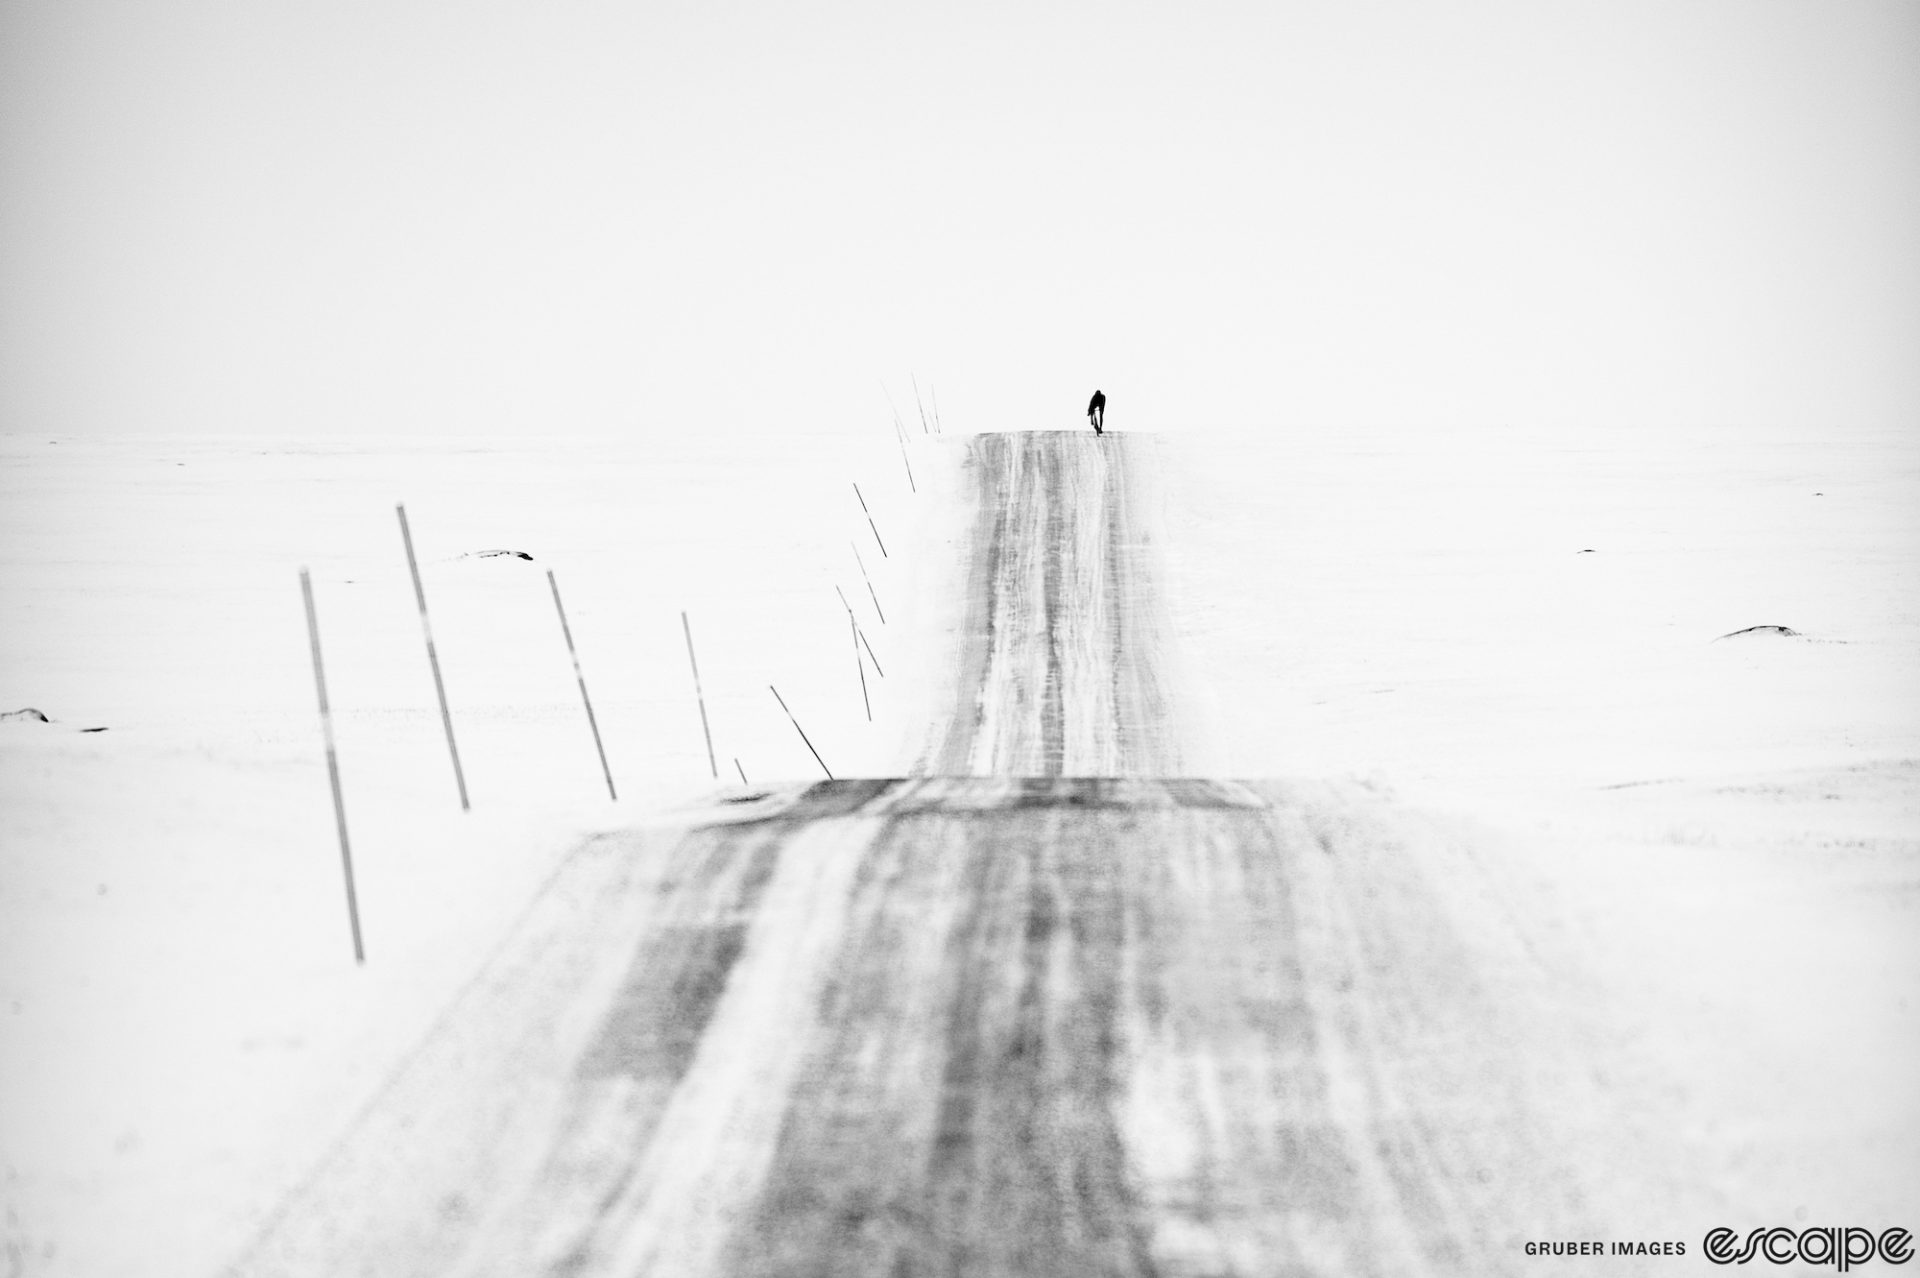 A lone rider is seen in the distance cresting a roller on a snowy road. The road is covered in snow but plowed, and the surrounding landscape is entirely winter white, with flat light creating an almost black-and-white effect.